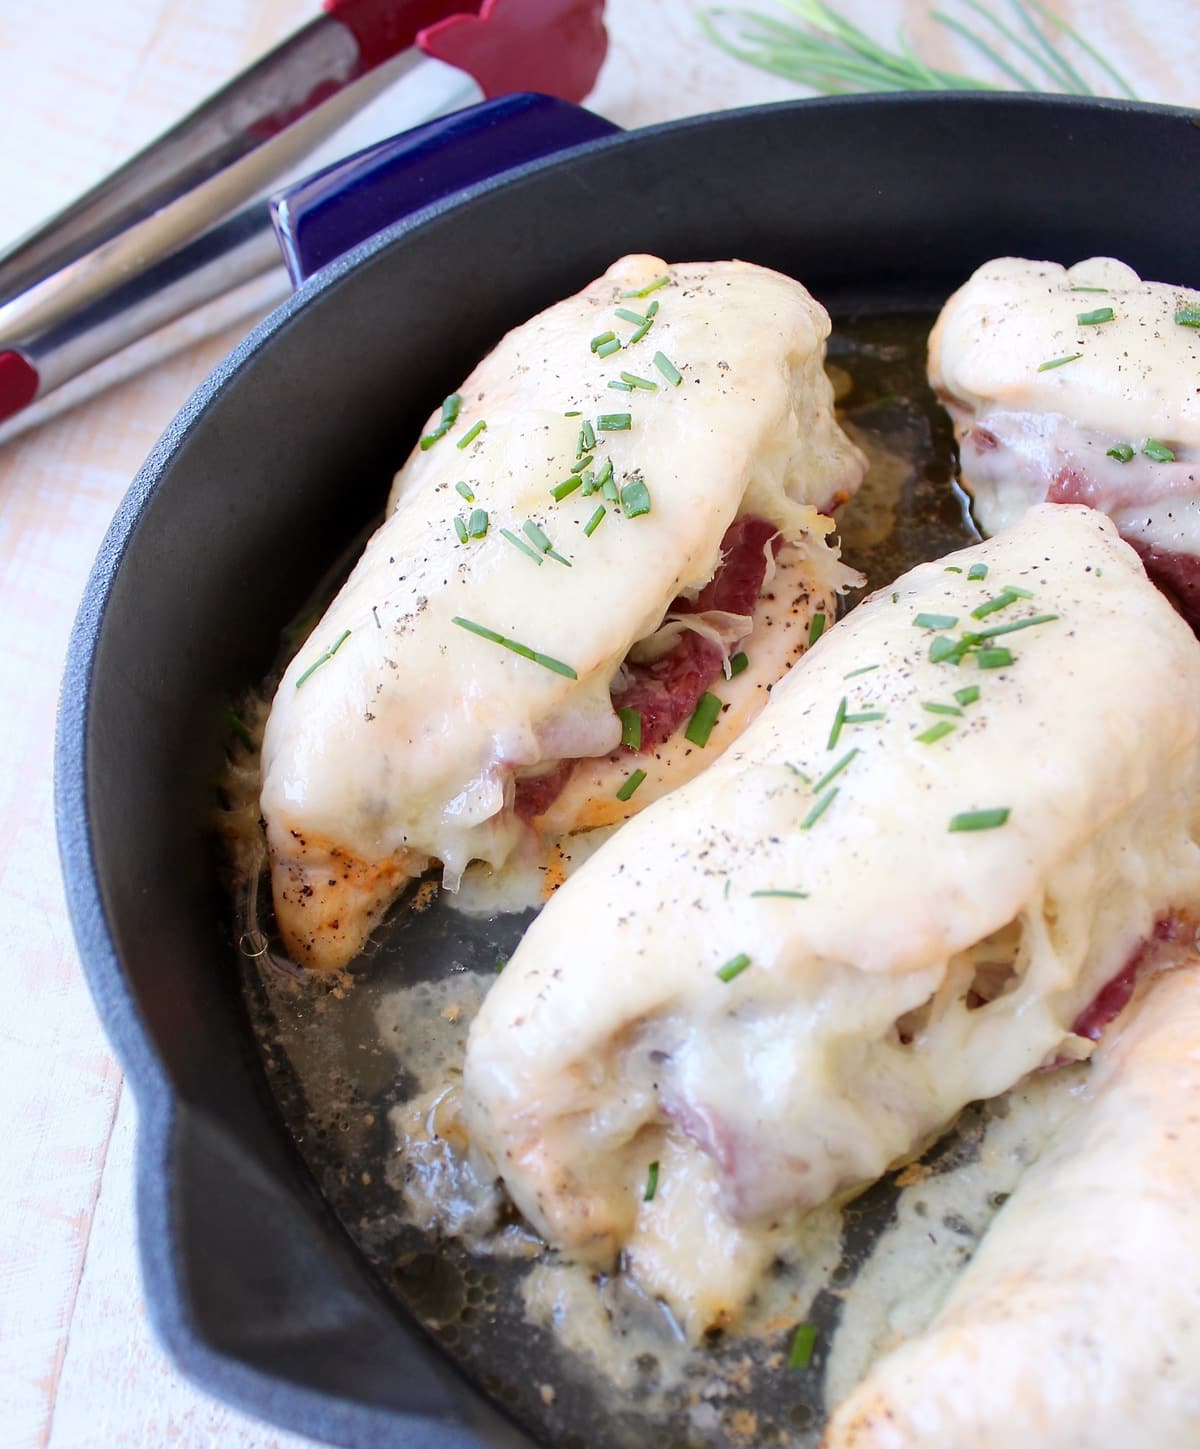 Reuben chicken is tossed with thousand island dressing, stuffed with sauerkraut & corned beef & topped with swiss cheese for a tasty, easy dinner recipe!